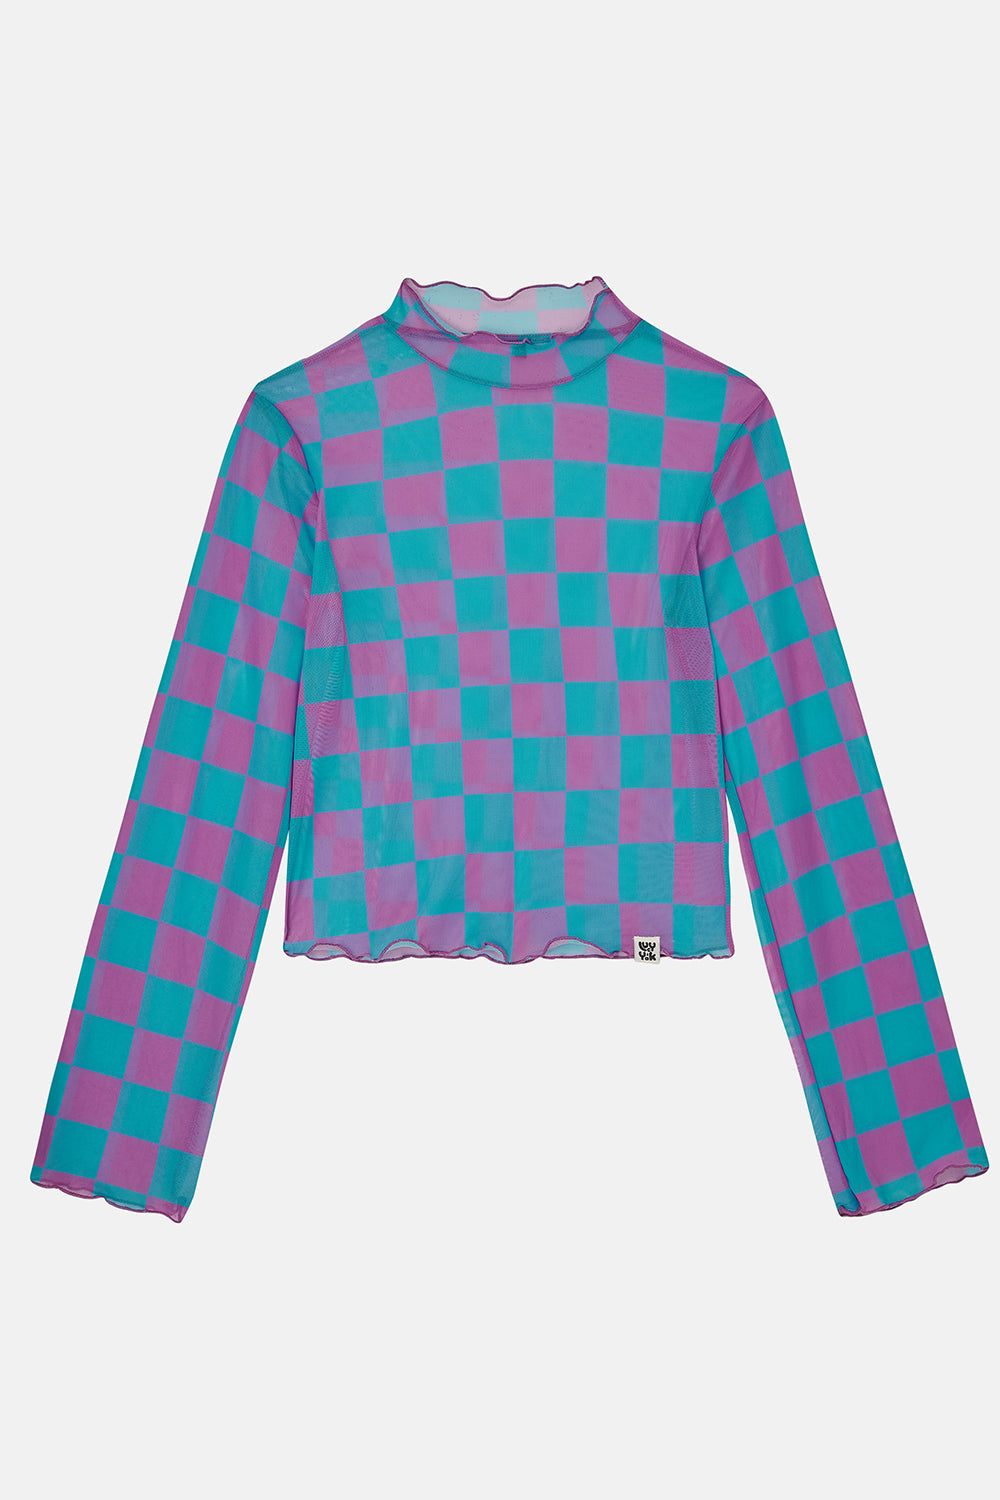 Perrie Long Sleeve Top: RECYCLED POLYESTER - Harmon Check